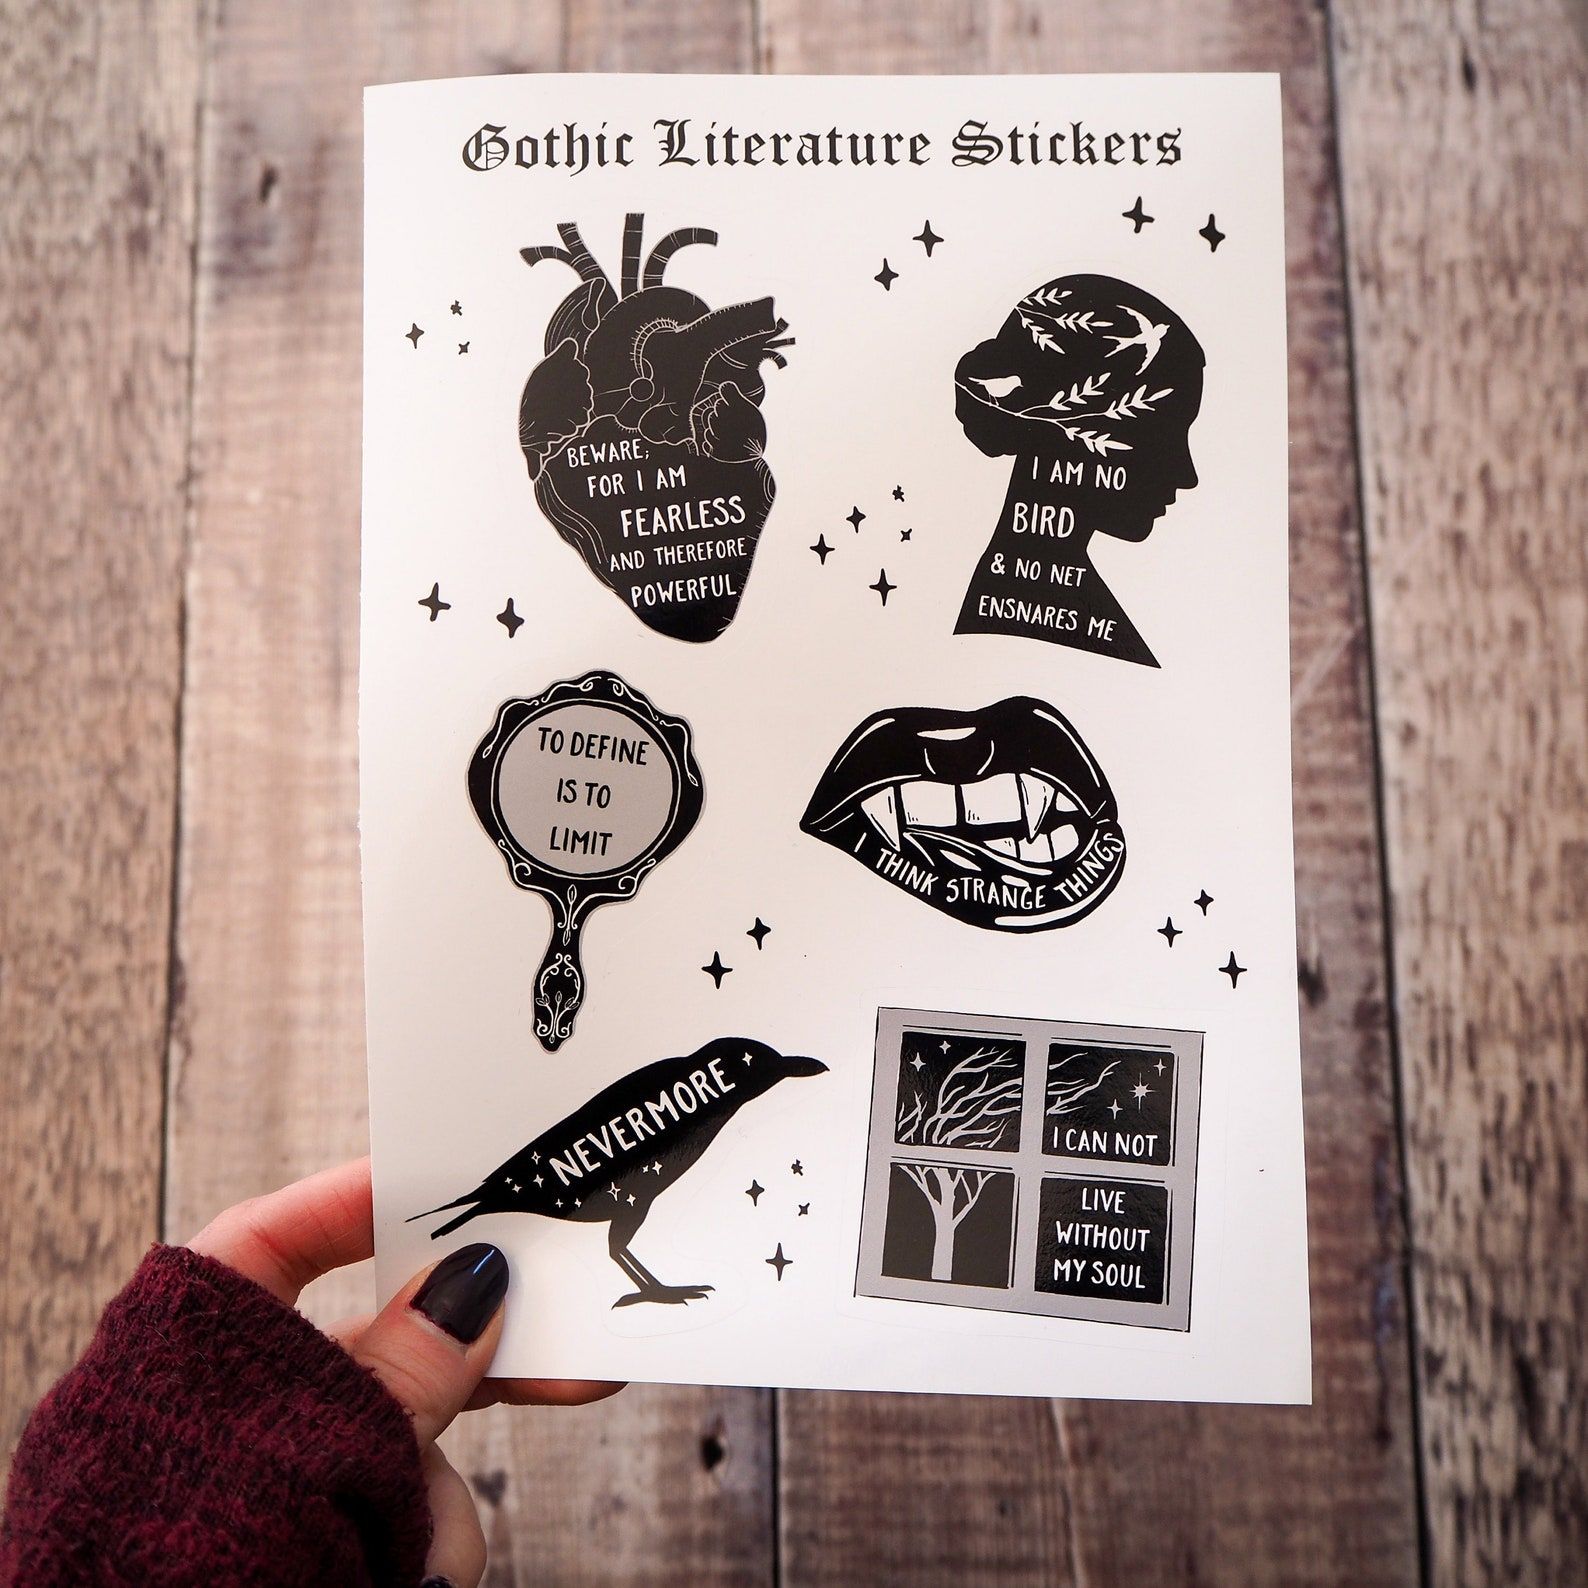 A sticker sheet full of black and white stickers with quotes from literary Gothic classics.